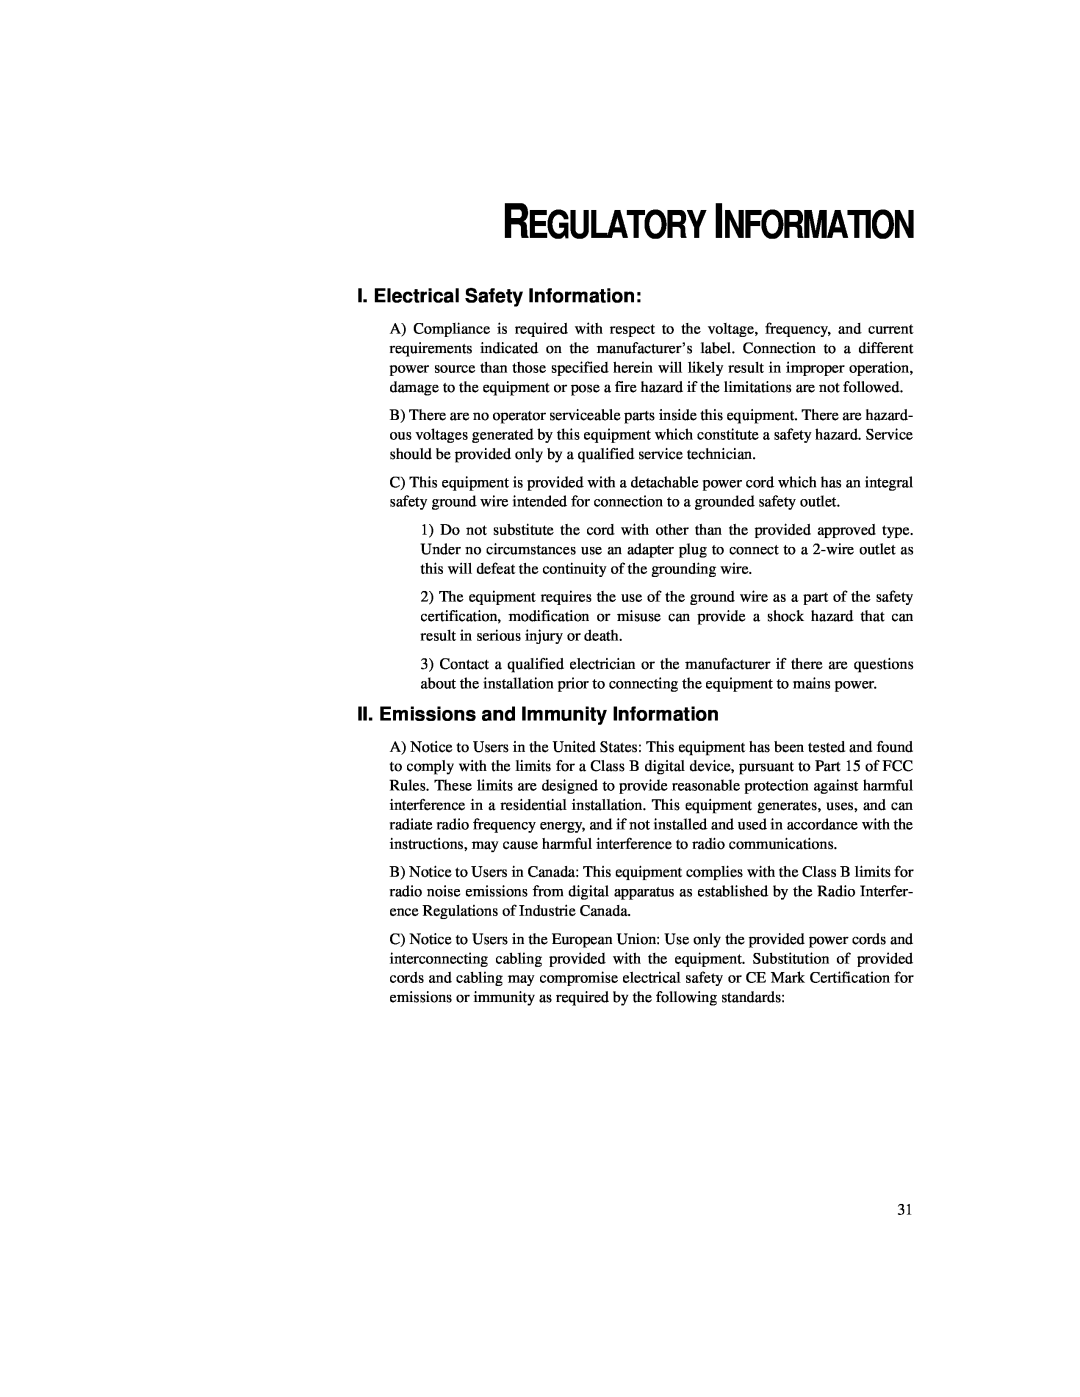 Elo TouchSystems 1524L Regulatory Information, I. Electrical Safety Information, II. Emissions and Immunity Information 